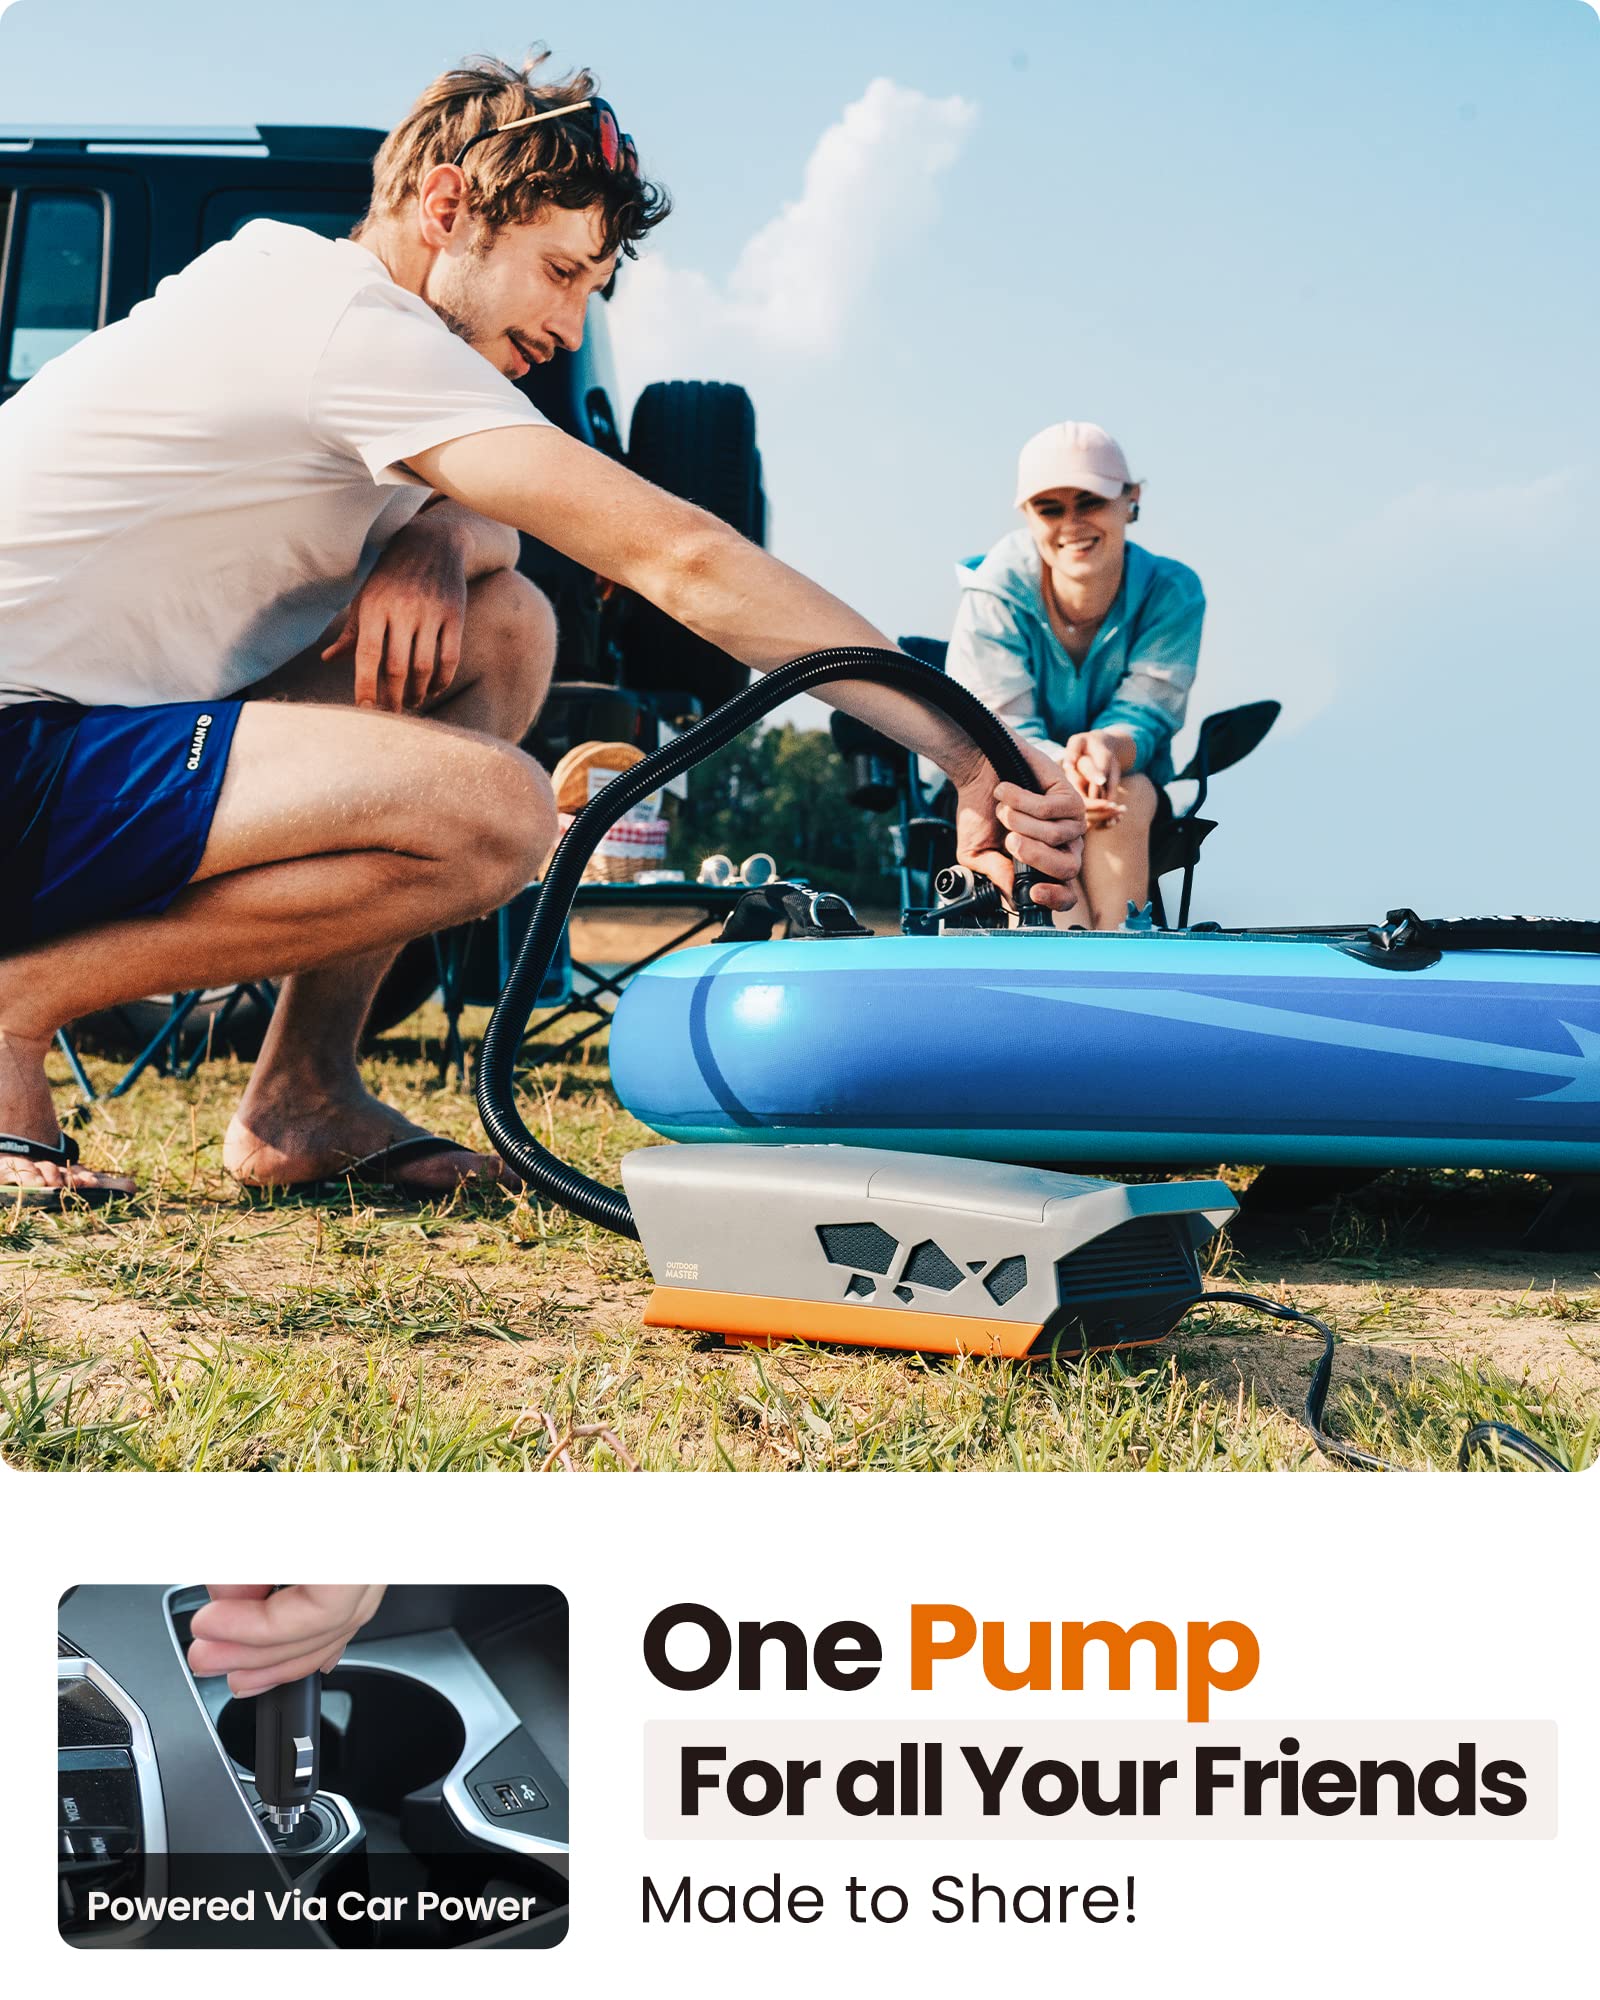 OutdoorMaster 20PSI High Pressure SUP Air Pump The Cachalot - Intelligent Dual Stage Inflation & Auto-Off, Deflation Function, 12V DC Car Connector for Inflatable Stand Up Paddle Boards, Boats